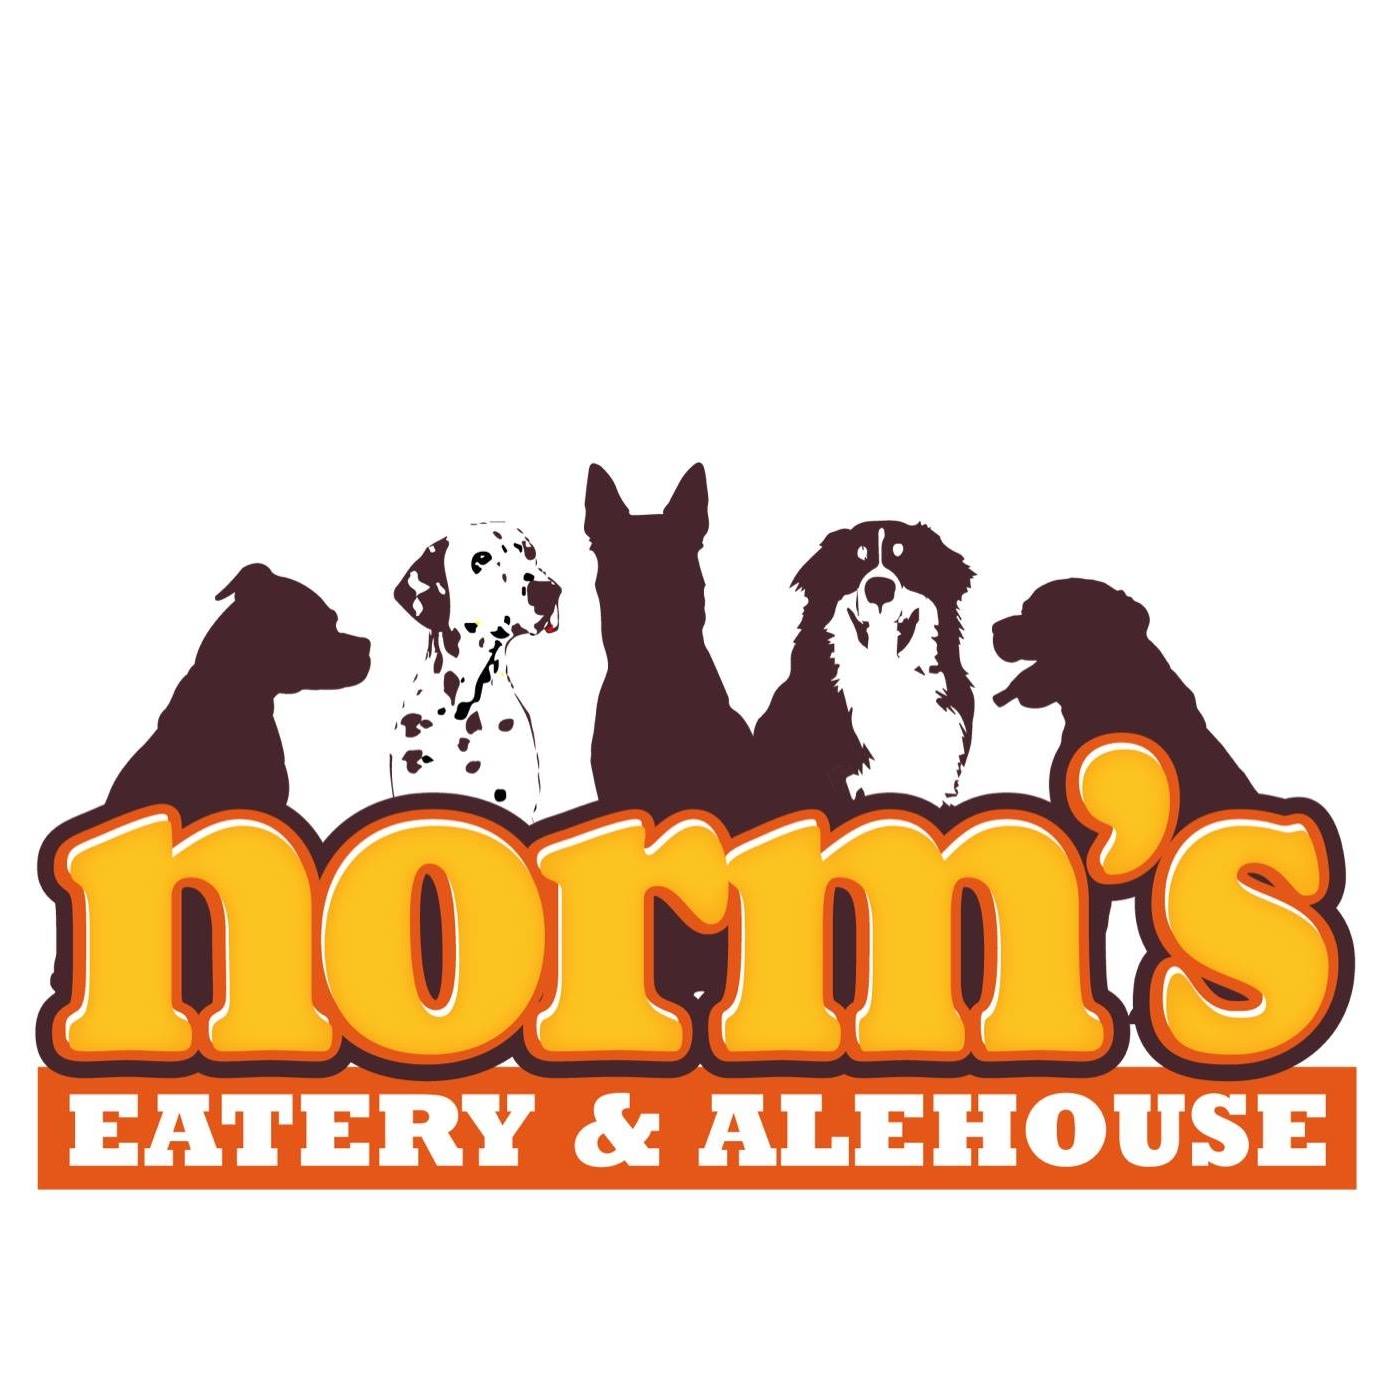 Business logo of Norm's Eatery & Ale House